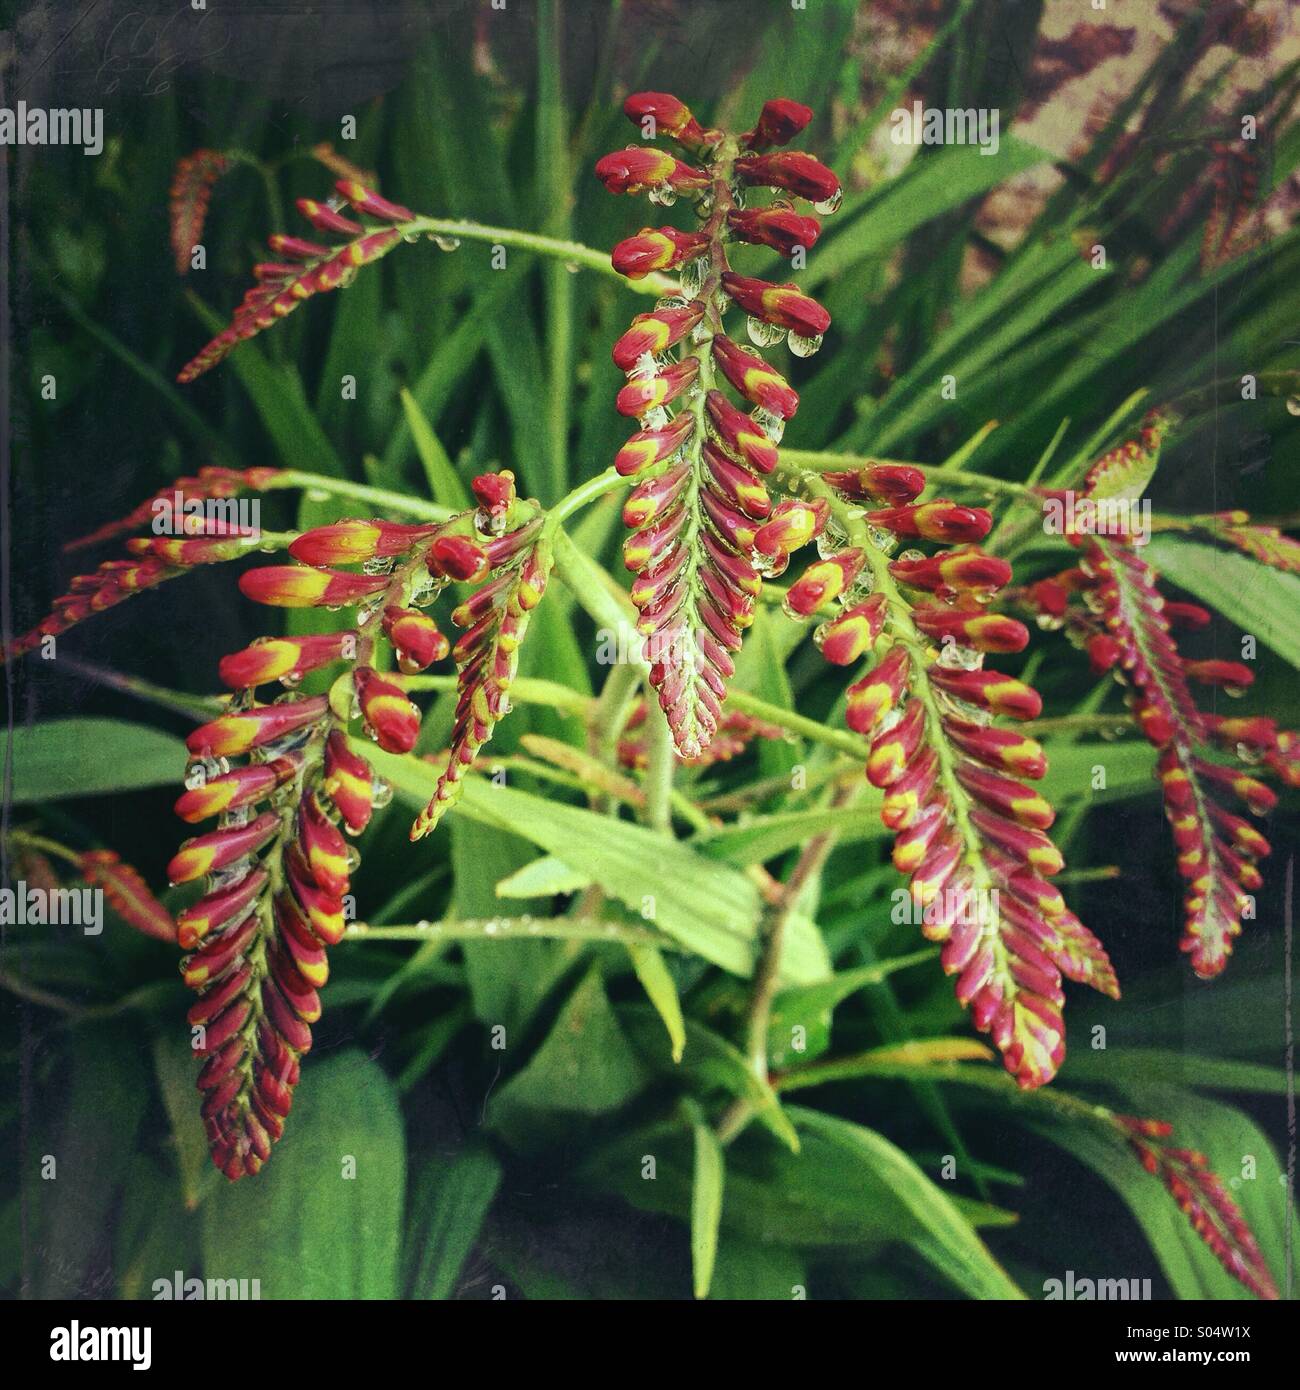 Immature inflorescence of Crocosmia flowers blooming with water drops after rain Stock Photo